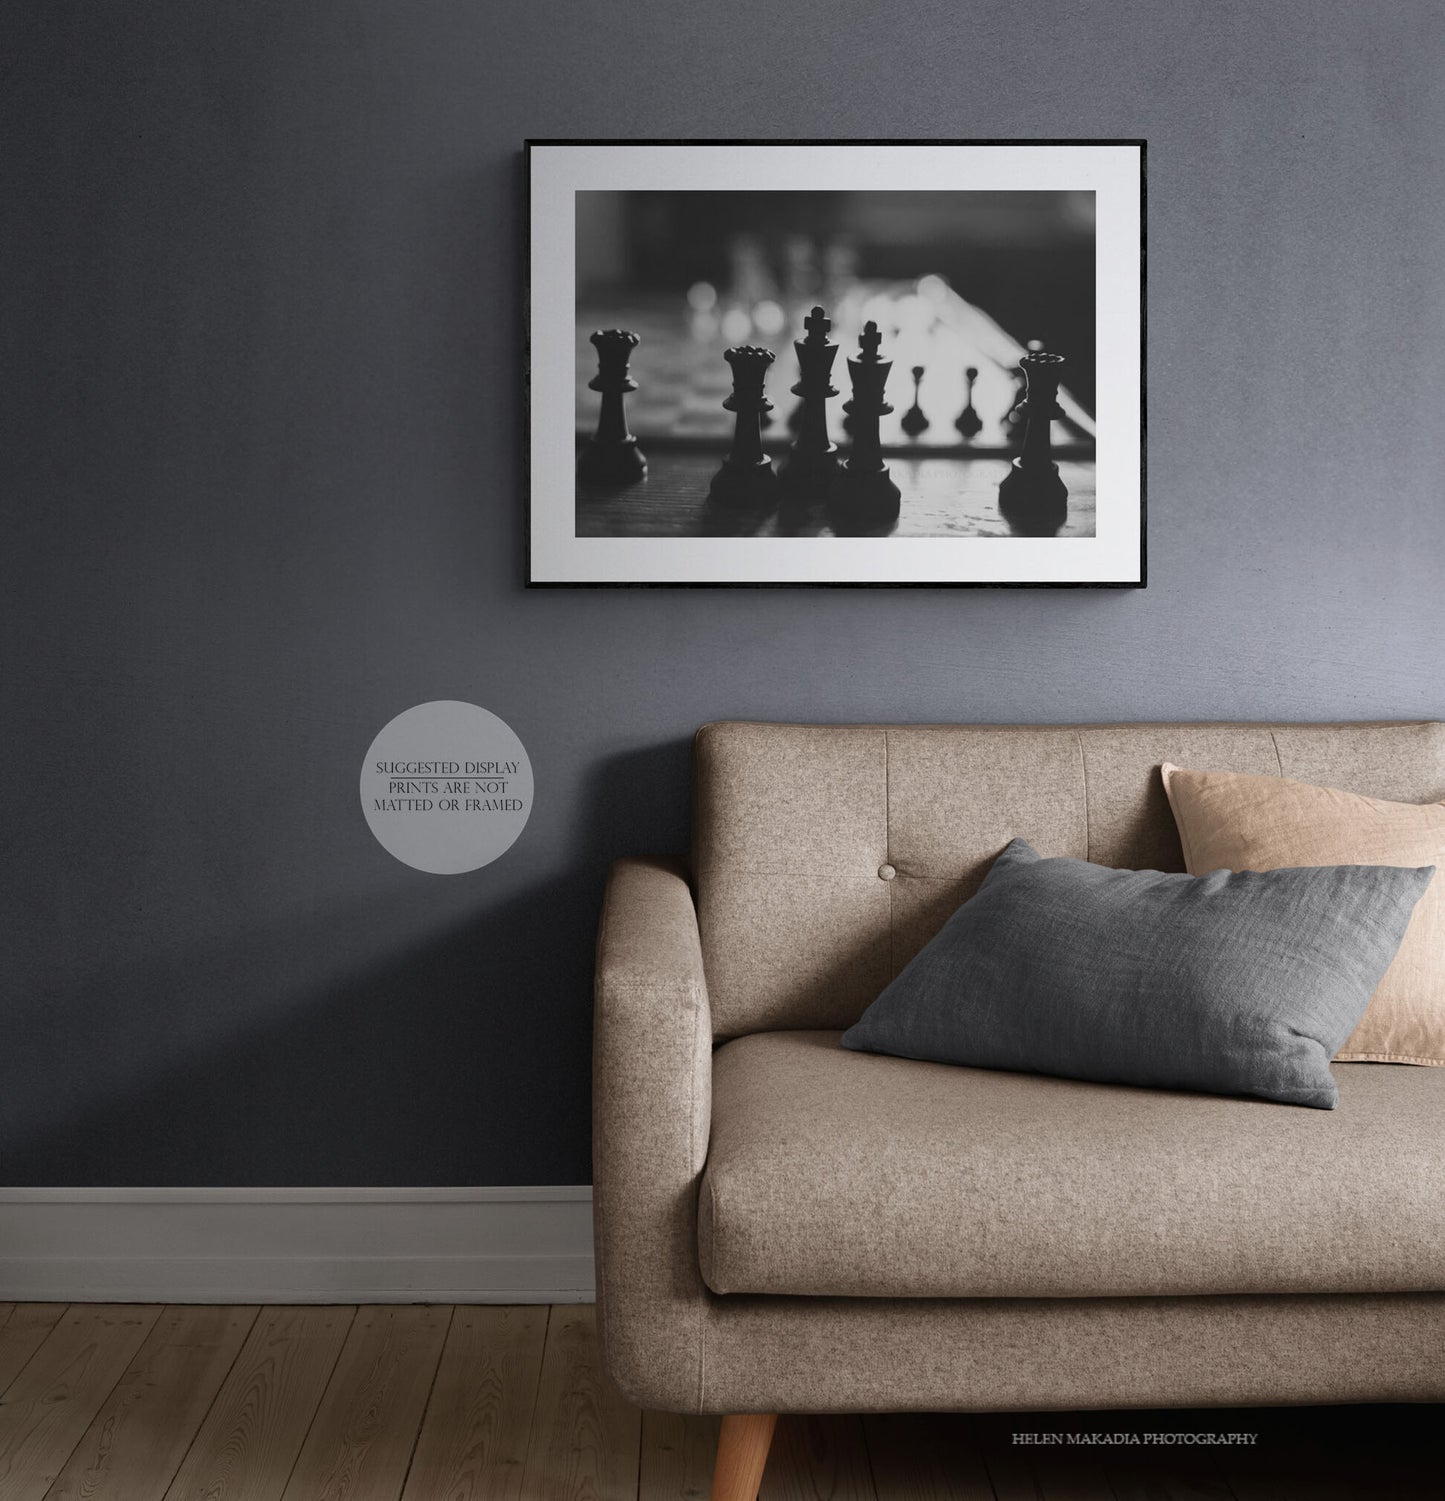 Black and White Photograph of Chess Pieces, Framed Print in a Living Room